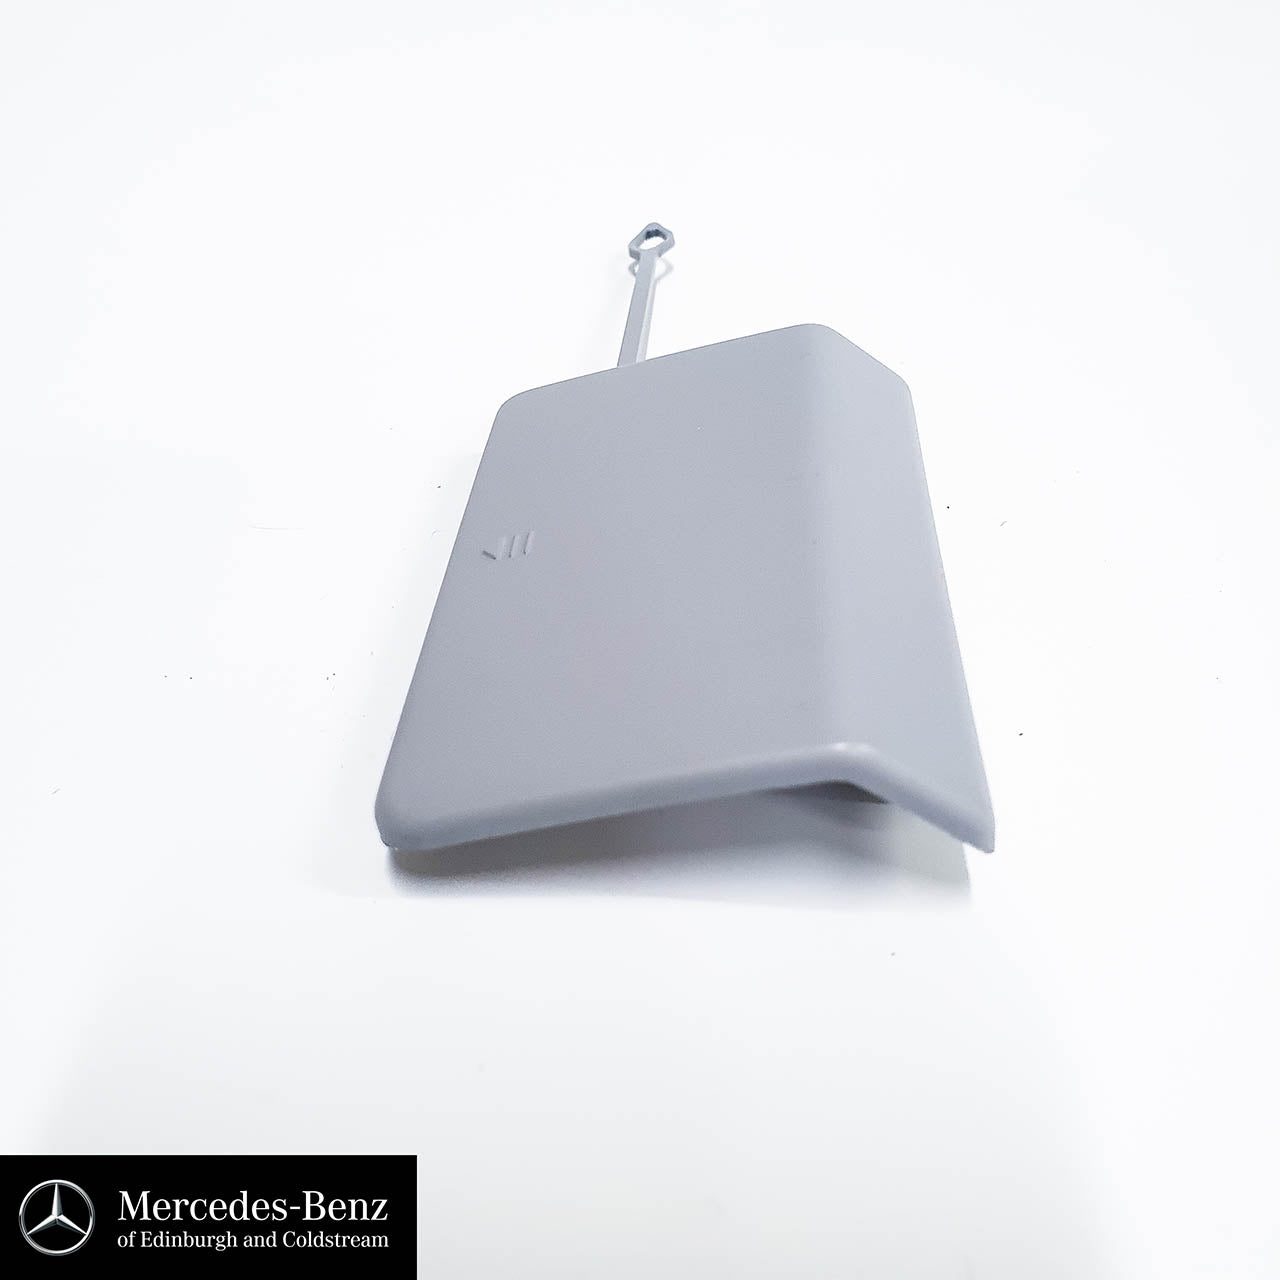 Genuine Mercedes-Benz rear tow hook cover